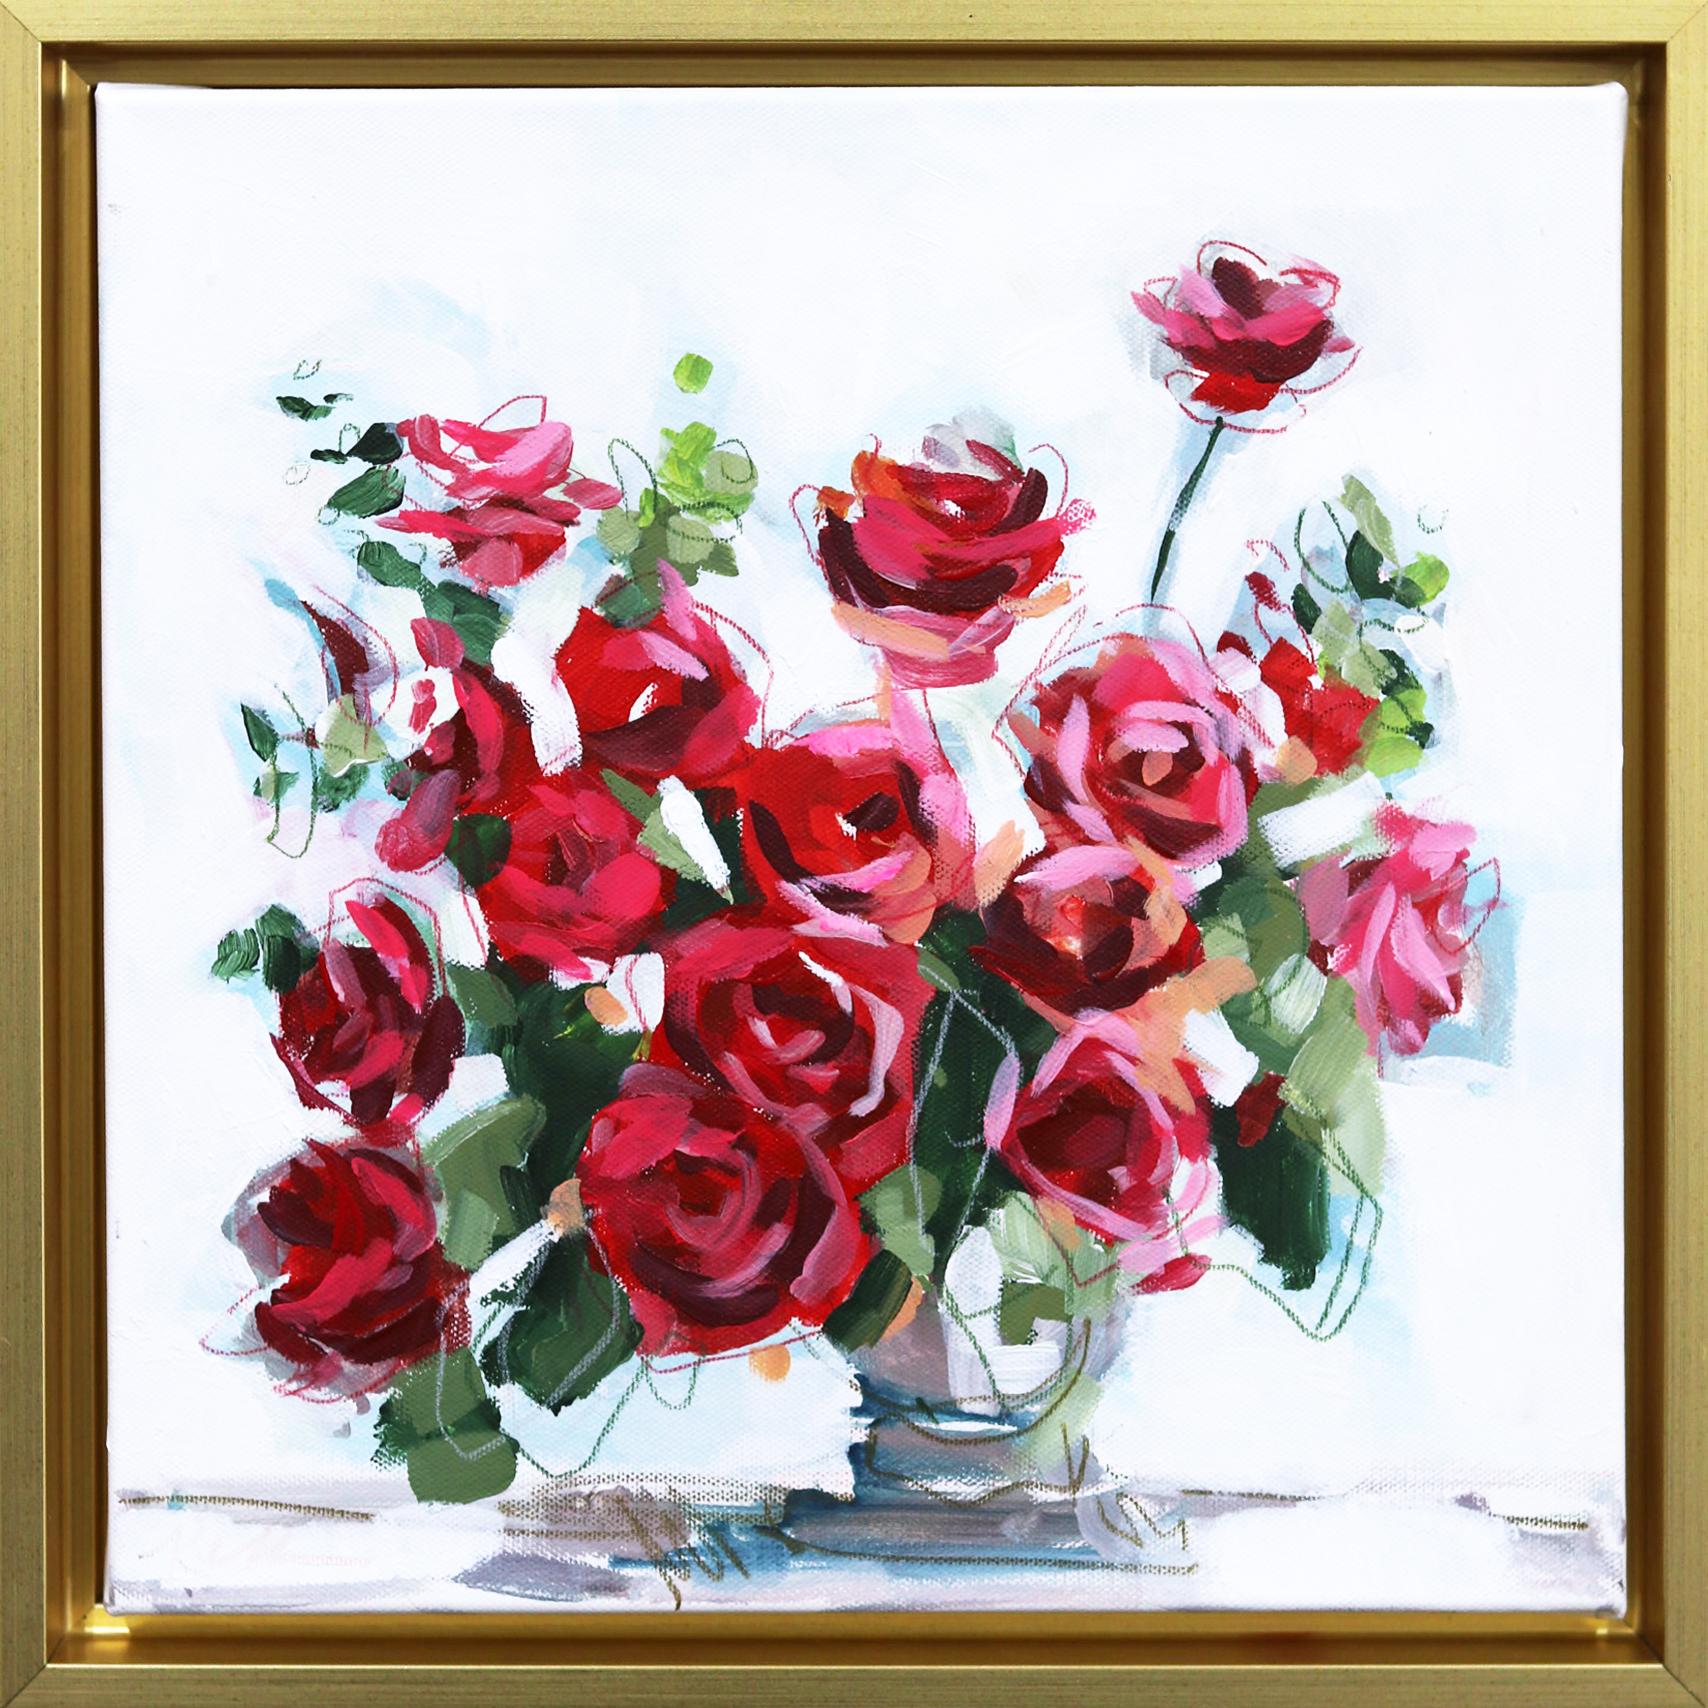 Kellie Newsome Figurative Painting - You Deserve More Than A Dozen Roses  - Original Framed Floral Painting on Canvas